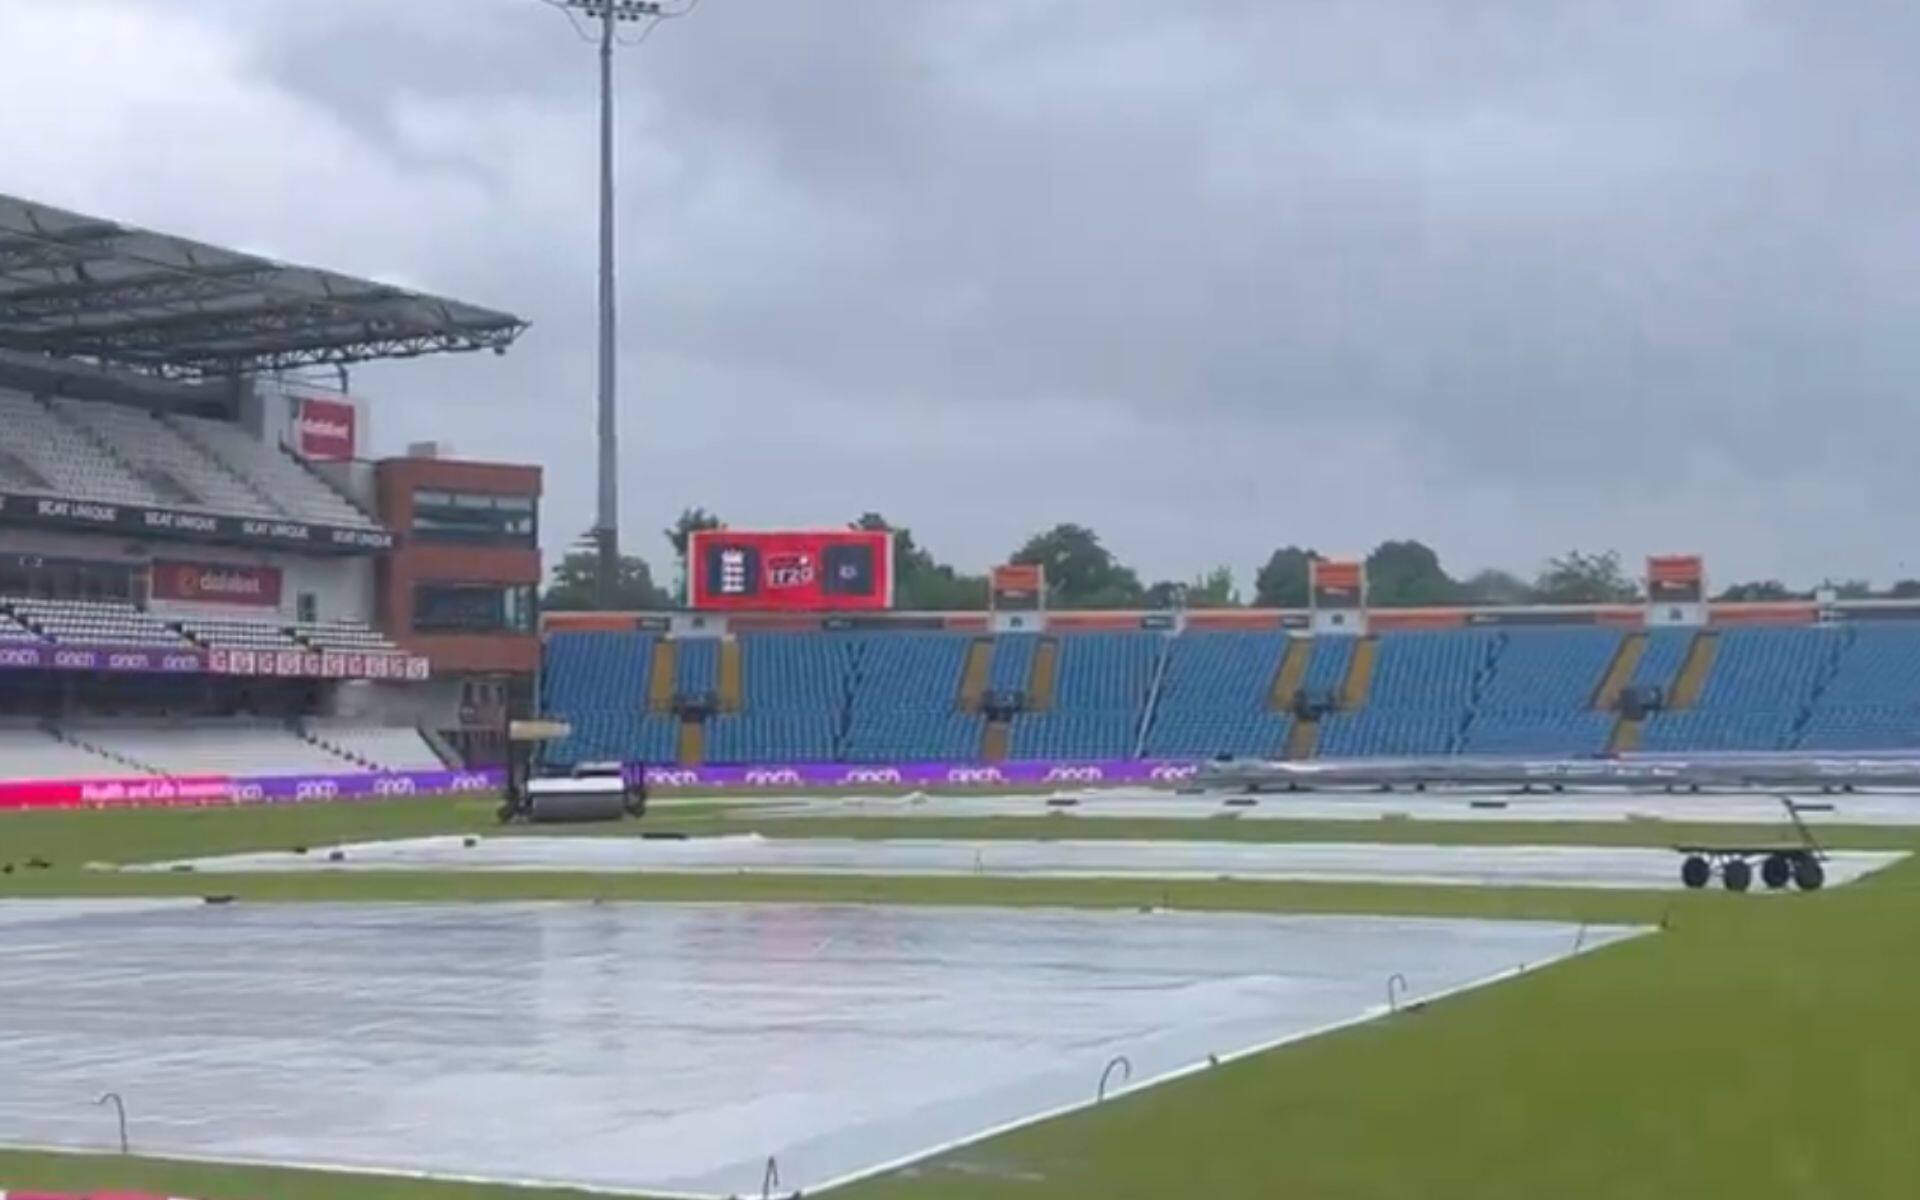 Rain likely to play spoilsport in ENG vs PAK T20I game (X.com)